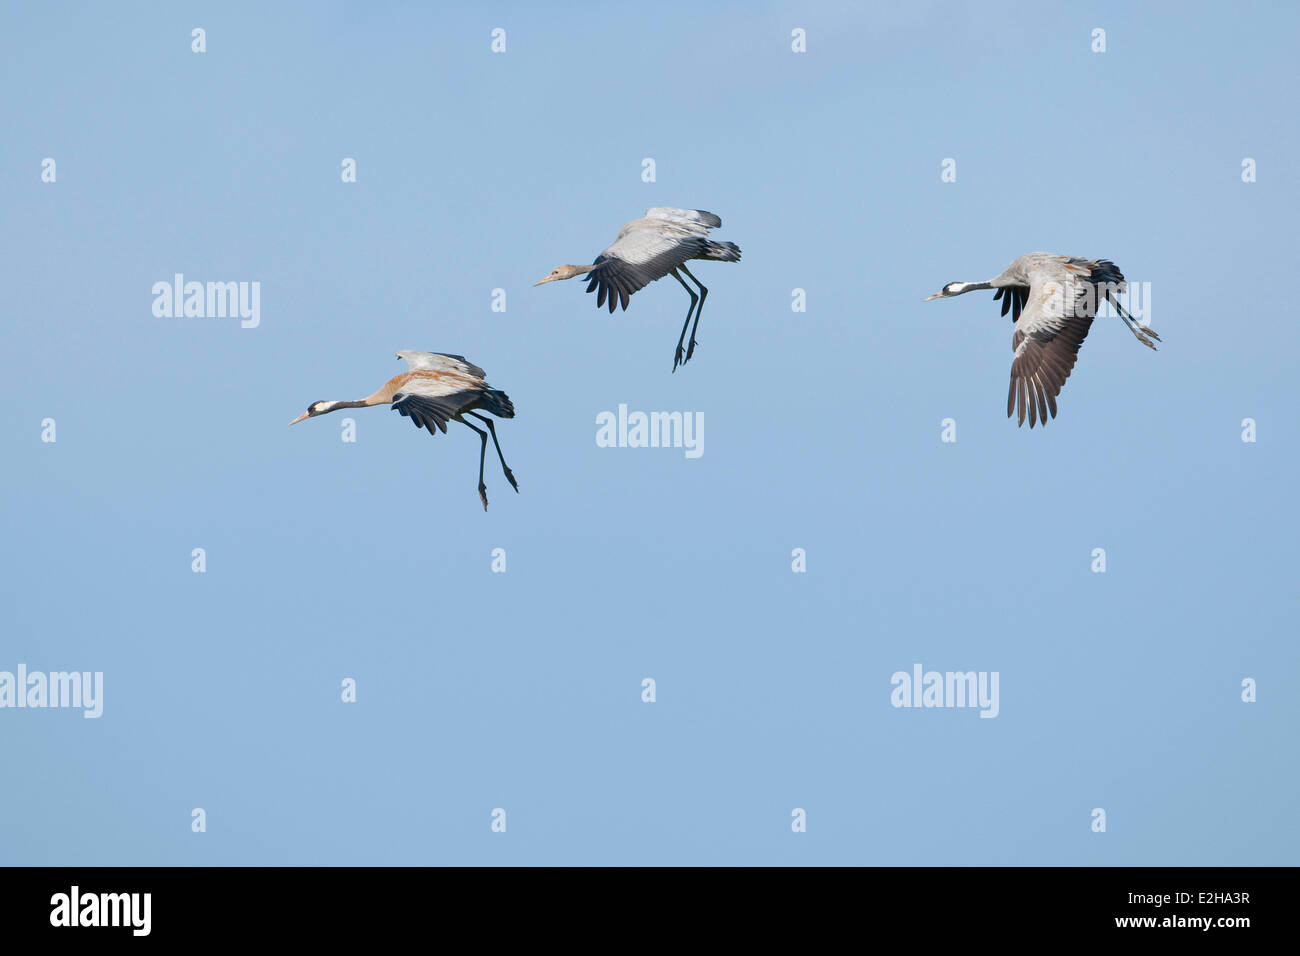 Common Cranes (Grus grus), two adult birds and a young bird, about to land, Mecklenburg-Western Pomerania, Germany Stock Photo